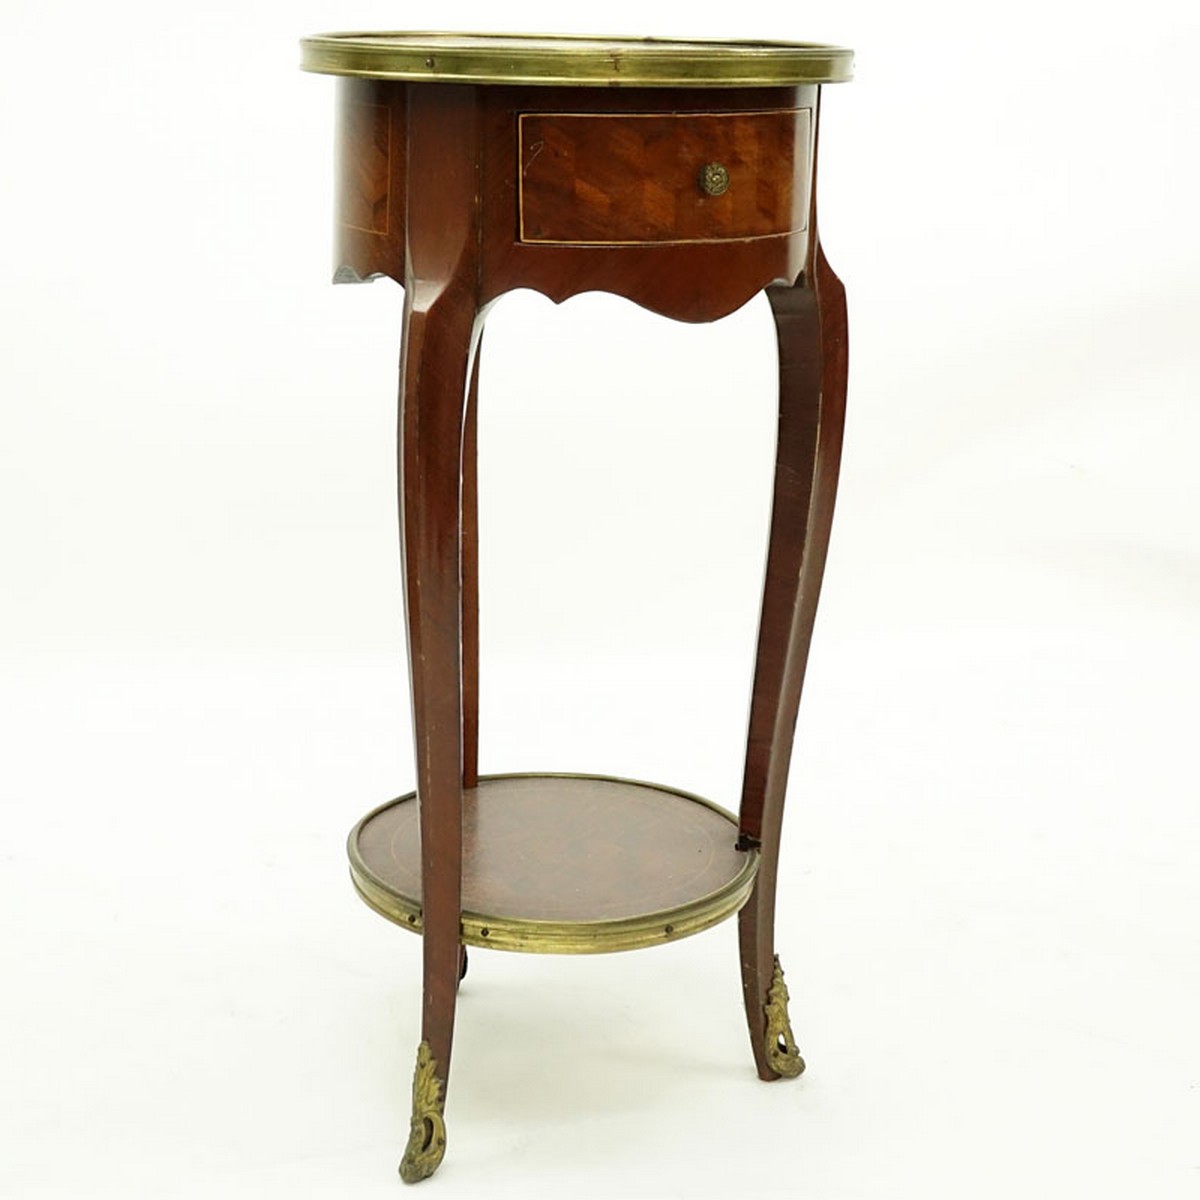 20th Century French Louis XVI Style Parquetry Inlaid Gilt Brass Round Side Table. Single fitted sliding drawer with shelf stretcher.